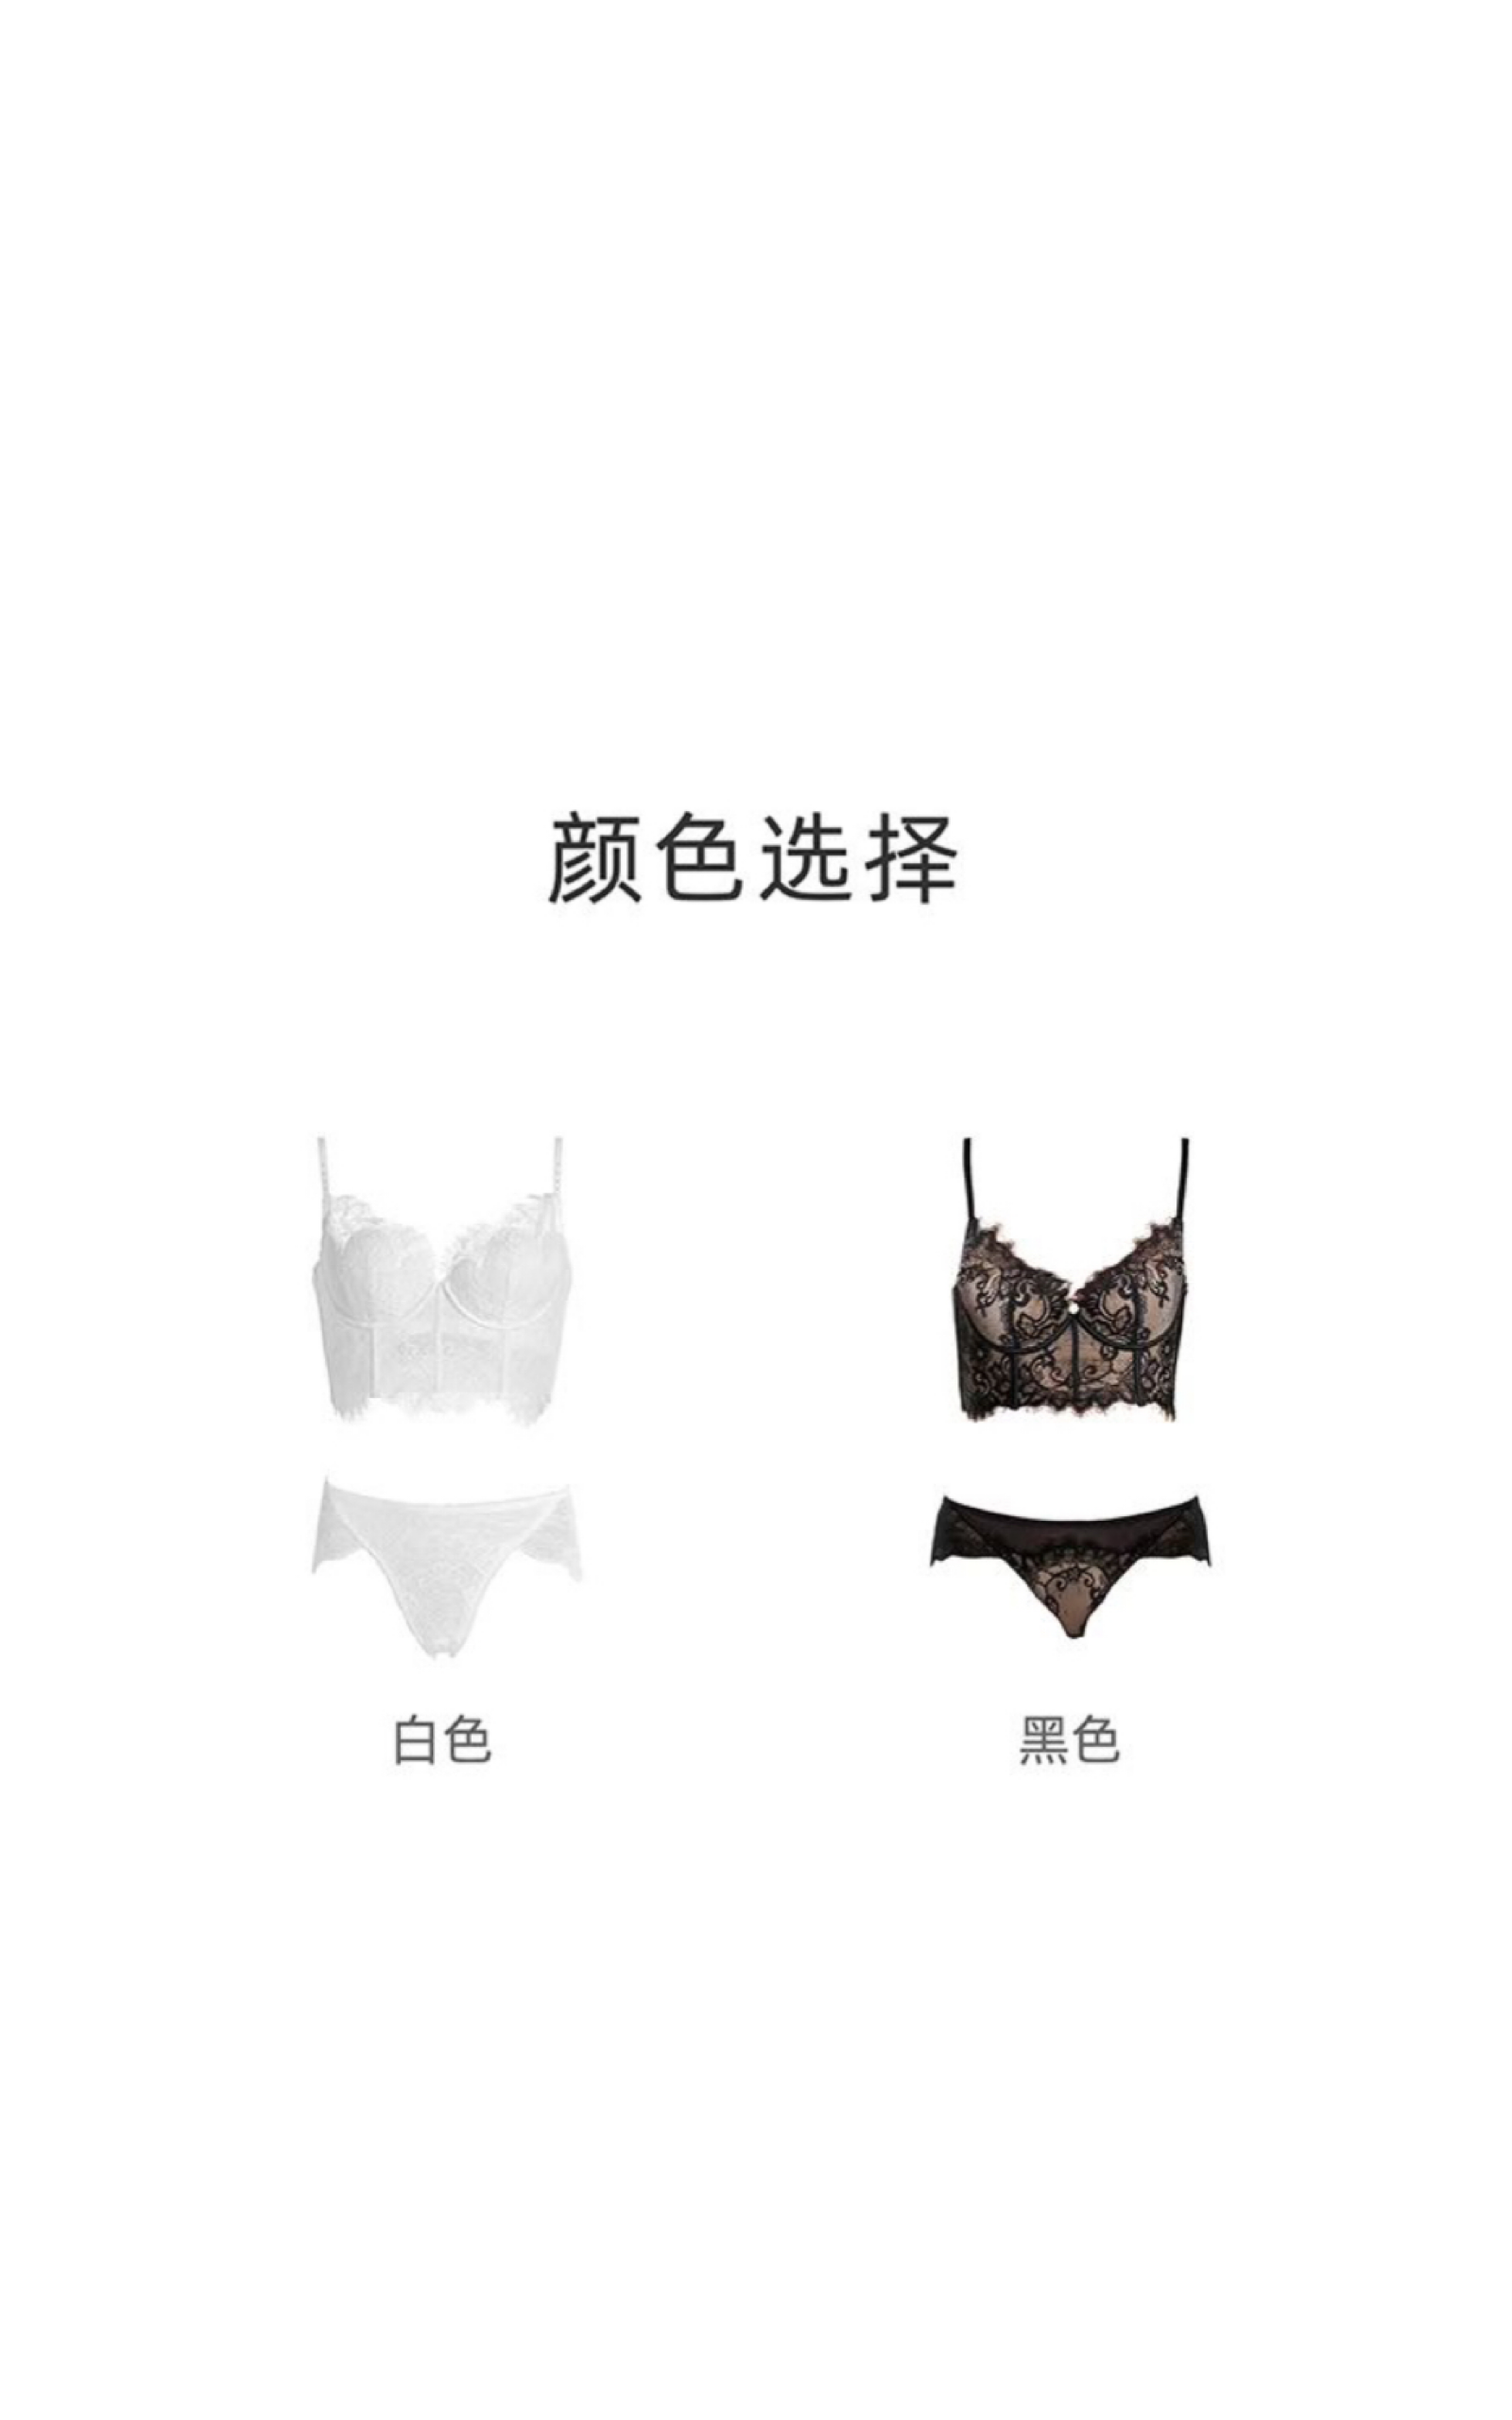 Authentic Micisty French Lace Bra Set [Due to hygiene concerns, no exchange is permissible]